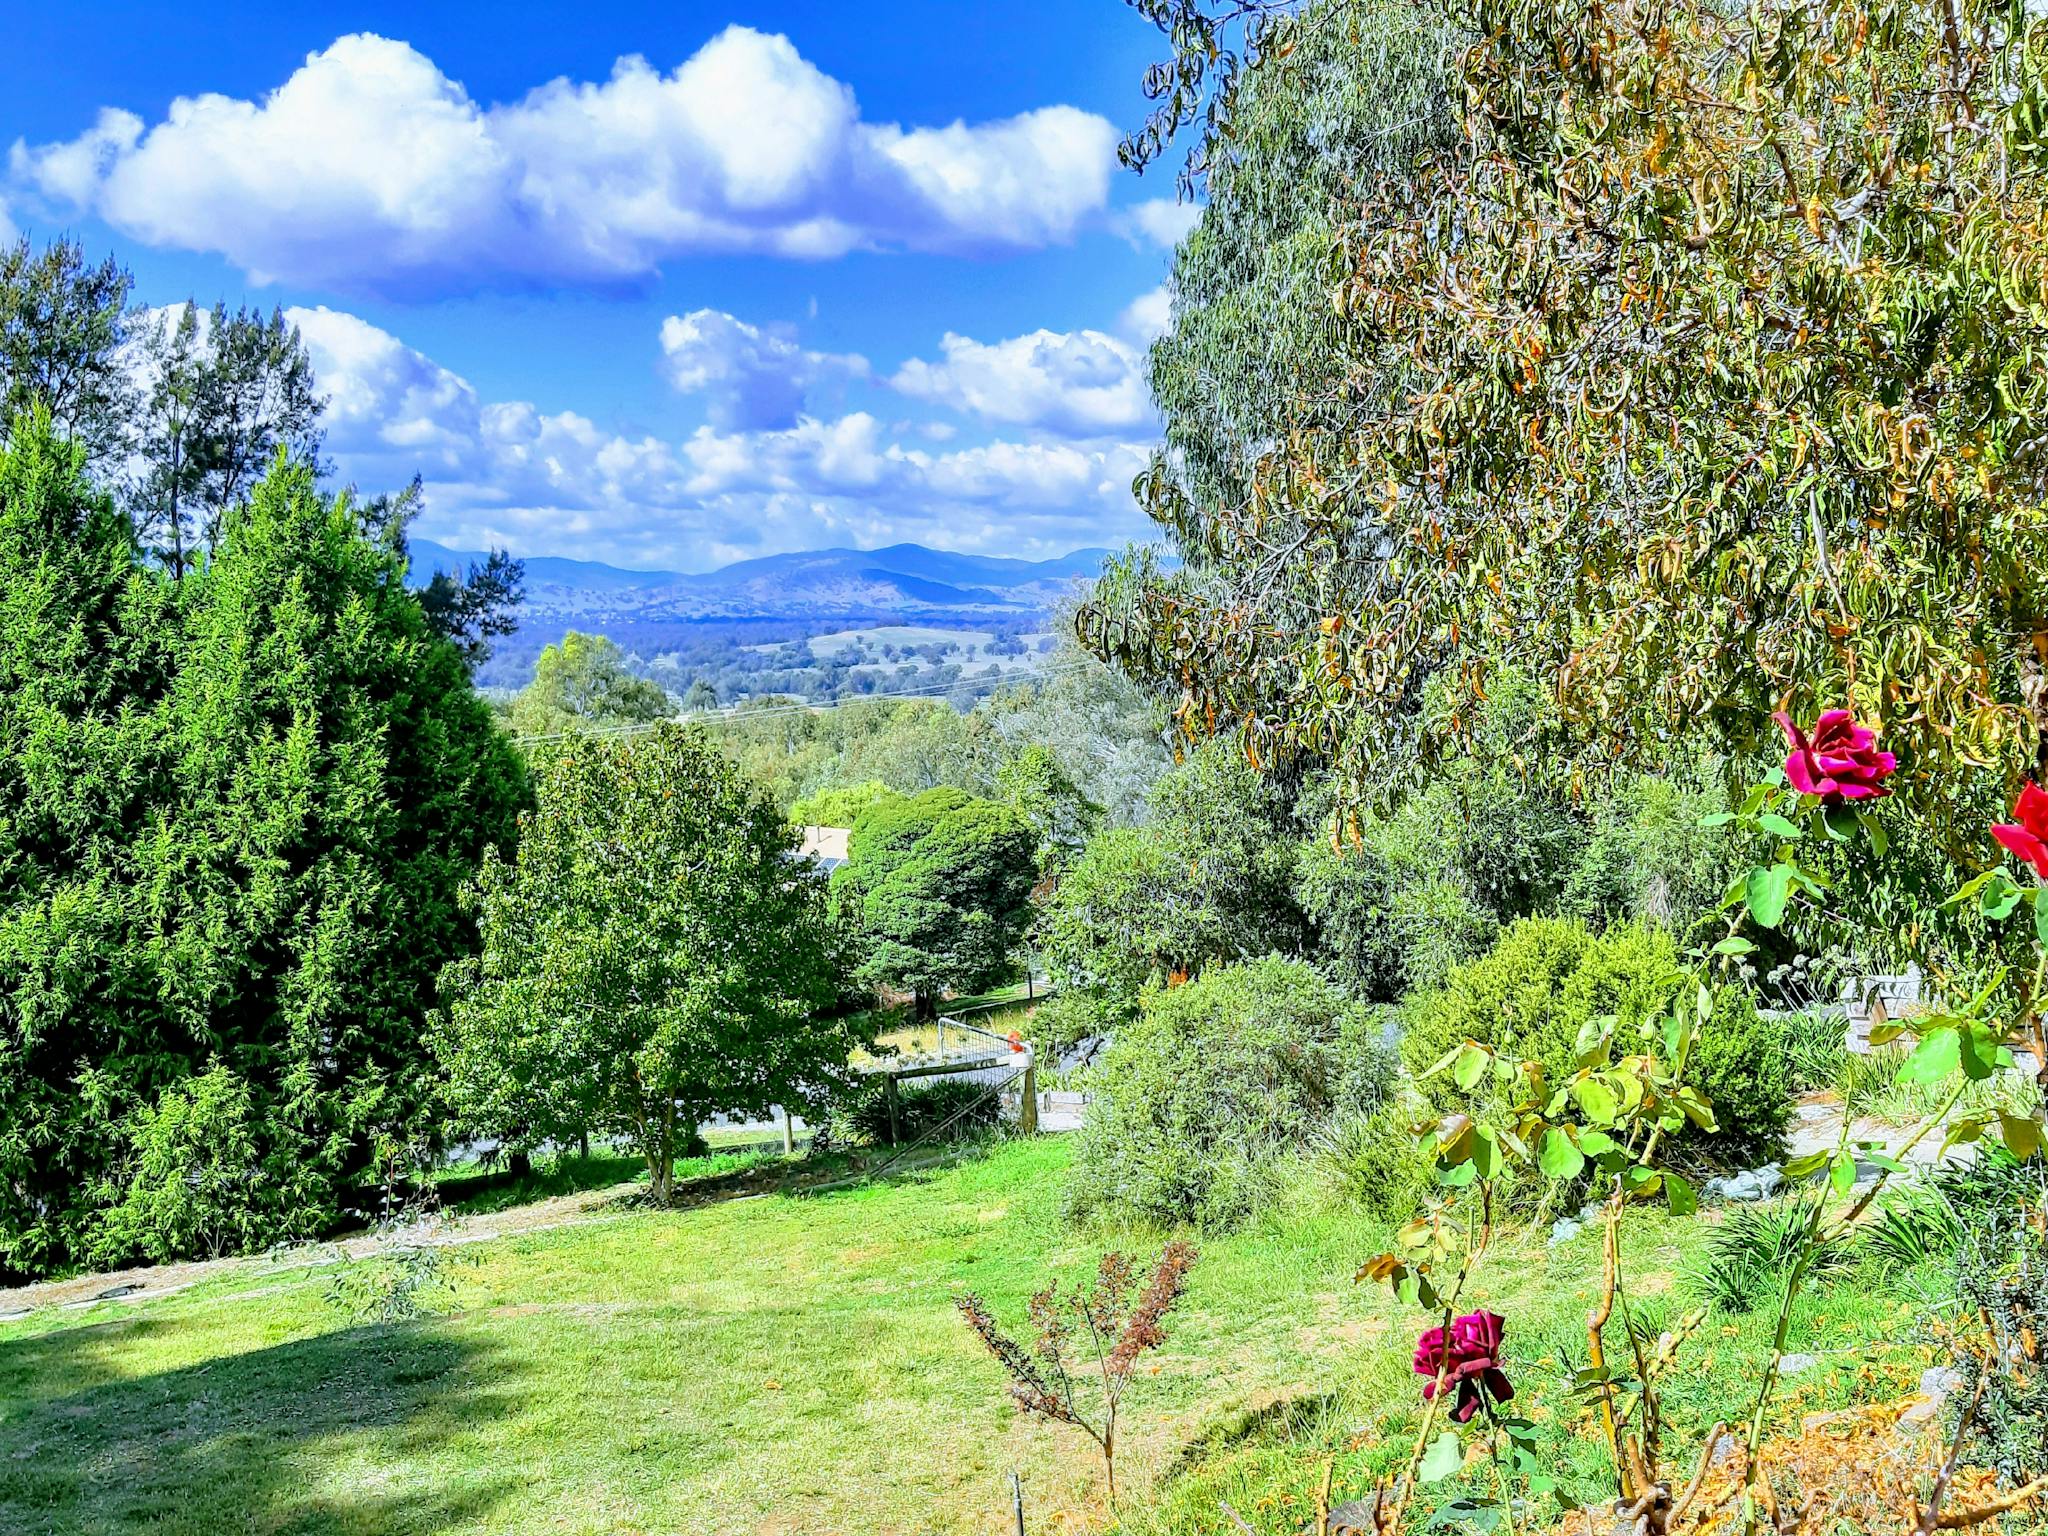 Relax and dine on the patio taking in the stunning views across the Kiewa Valley